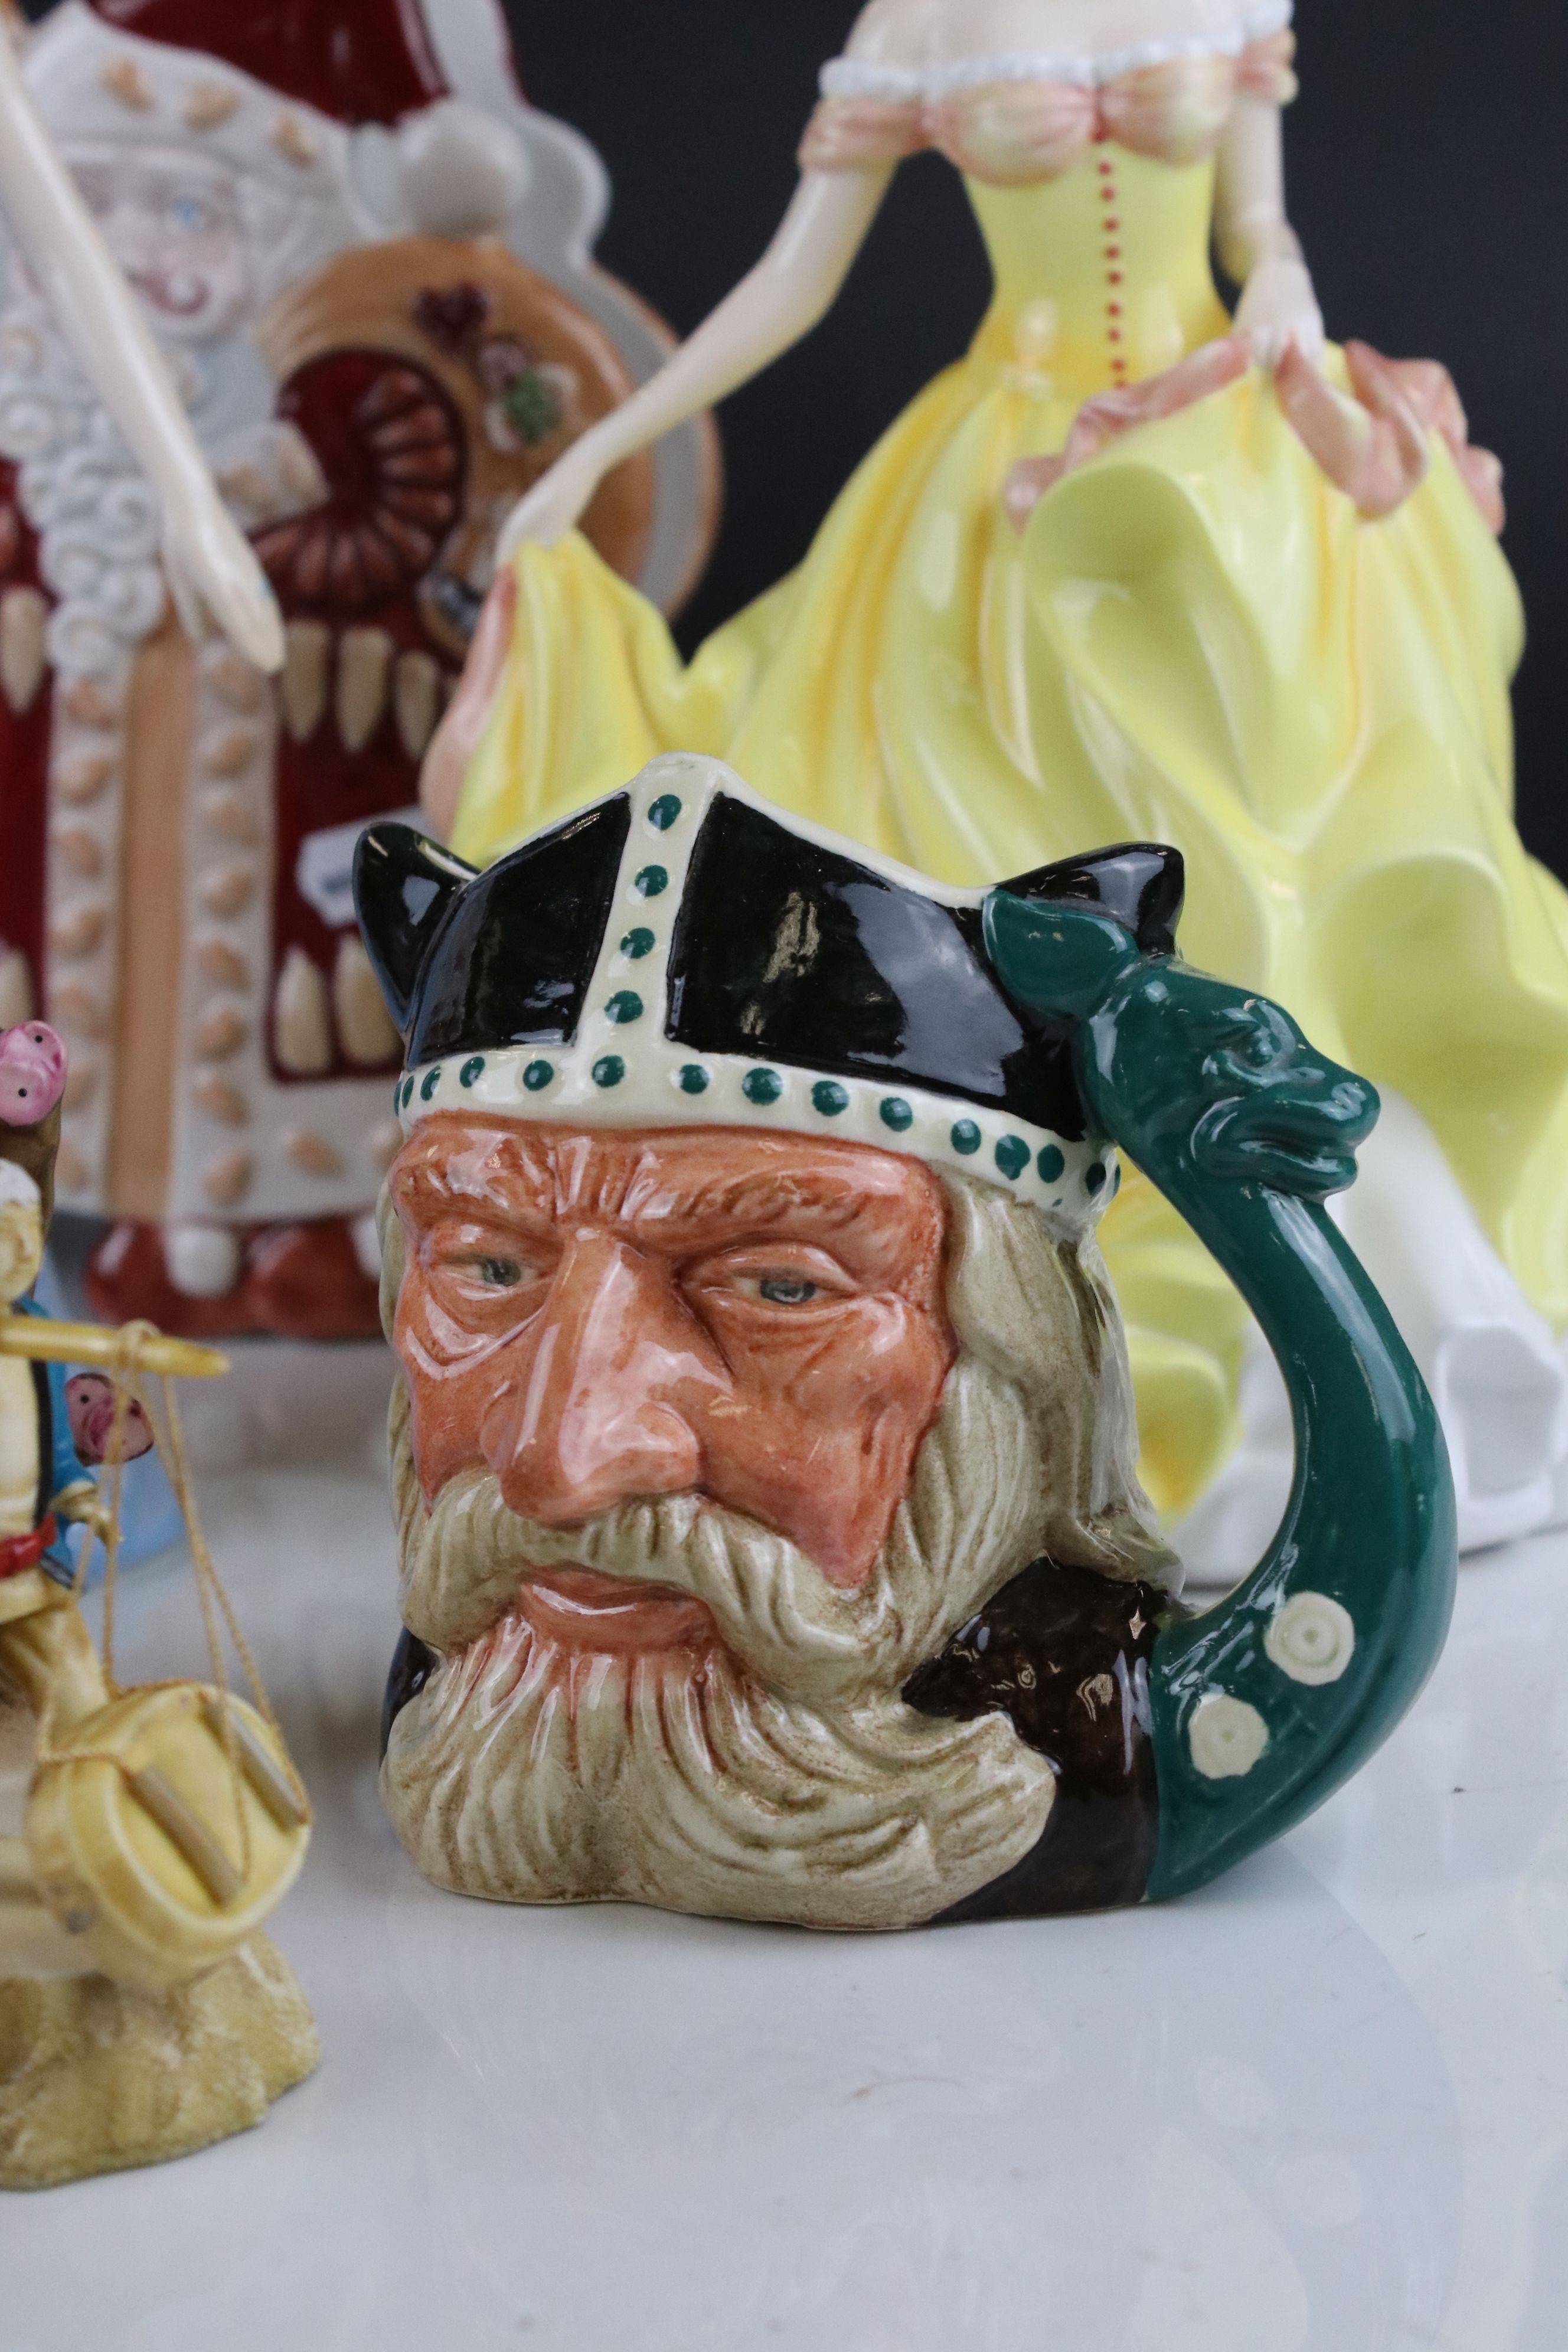 Mixed Lot of Ceramics including Two Royal Doulton Figurines and a Coalport Figurine, Pair of - Image 6 of 10